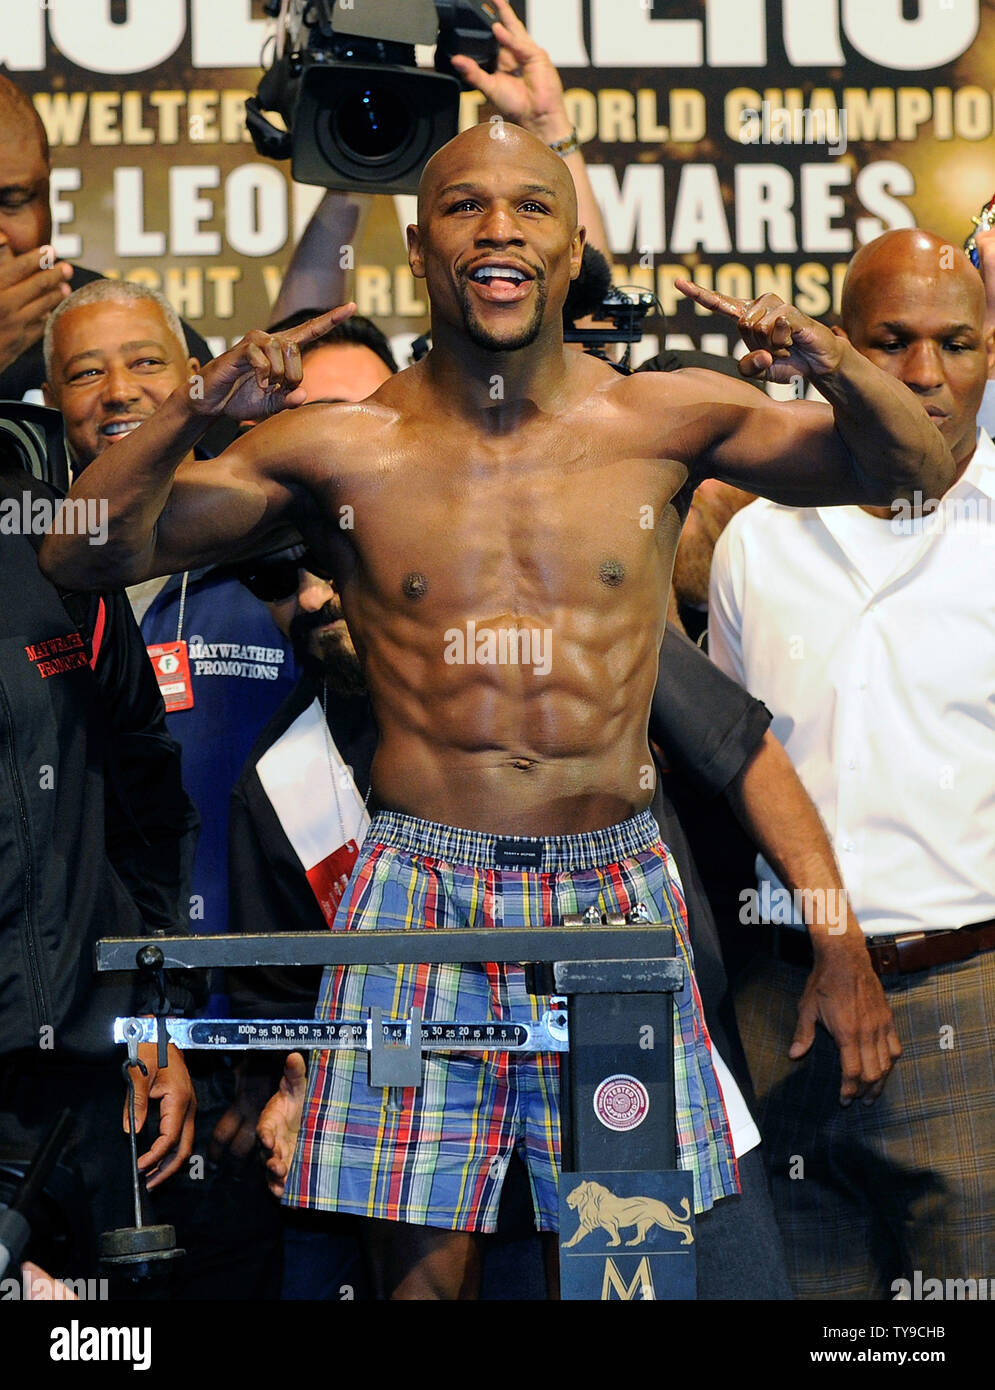 Boxer Floyd Mayweather weighs in at 146 pounds for his fight against Robert Guerrero for the WBC and Vacant Ring Magazine Welterweight titles at the MGM Grand Garden Arena in Las Vegas, Nevada on May 3, 2013. UPI/David Becker Stock Photo